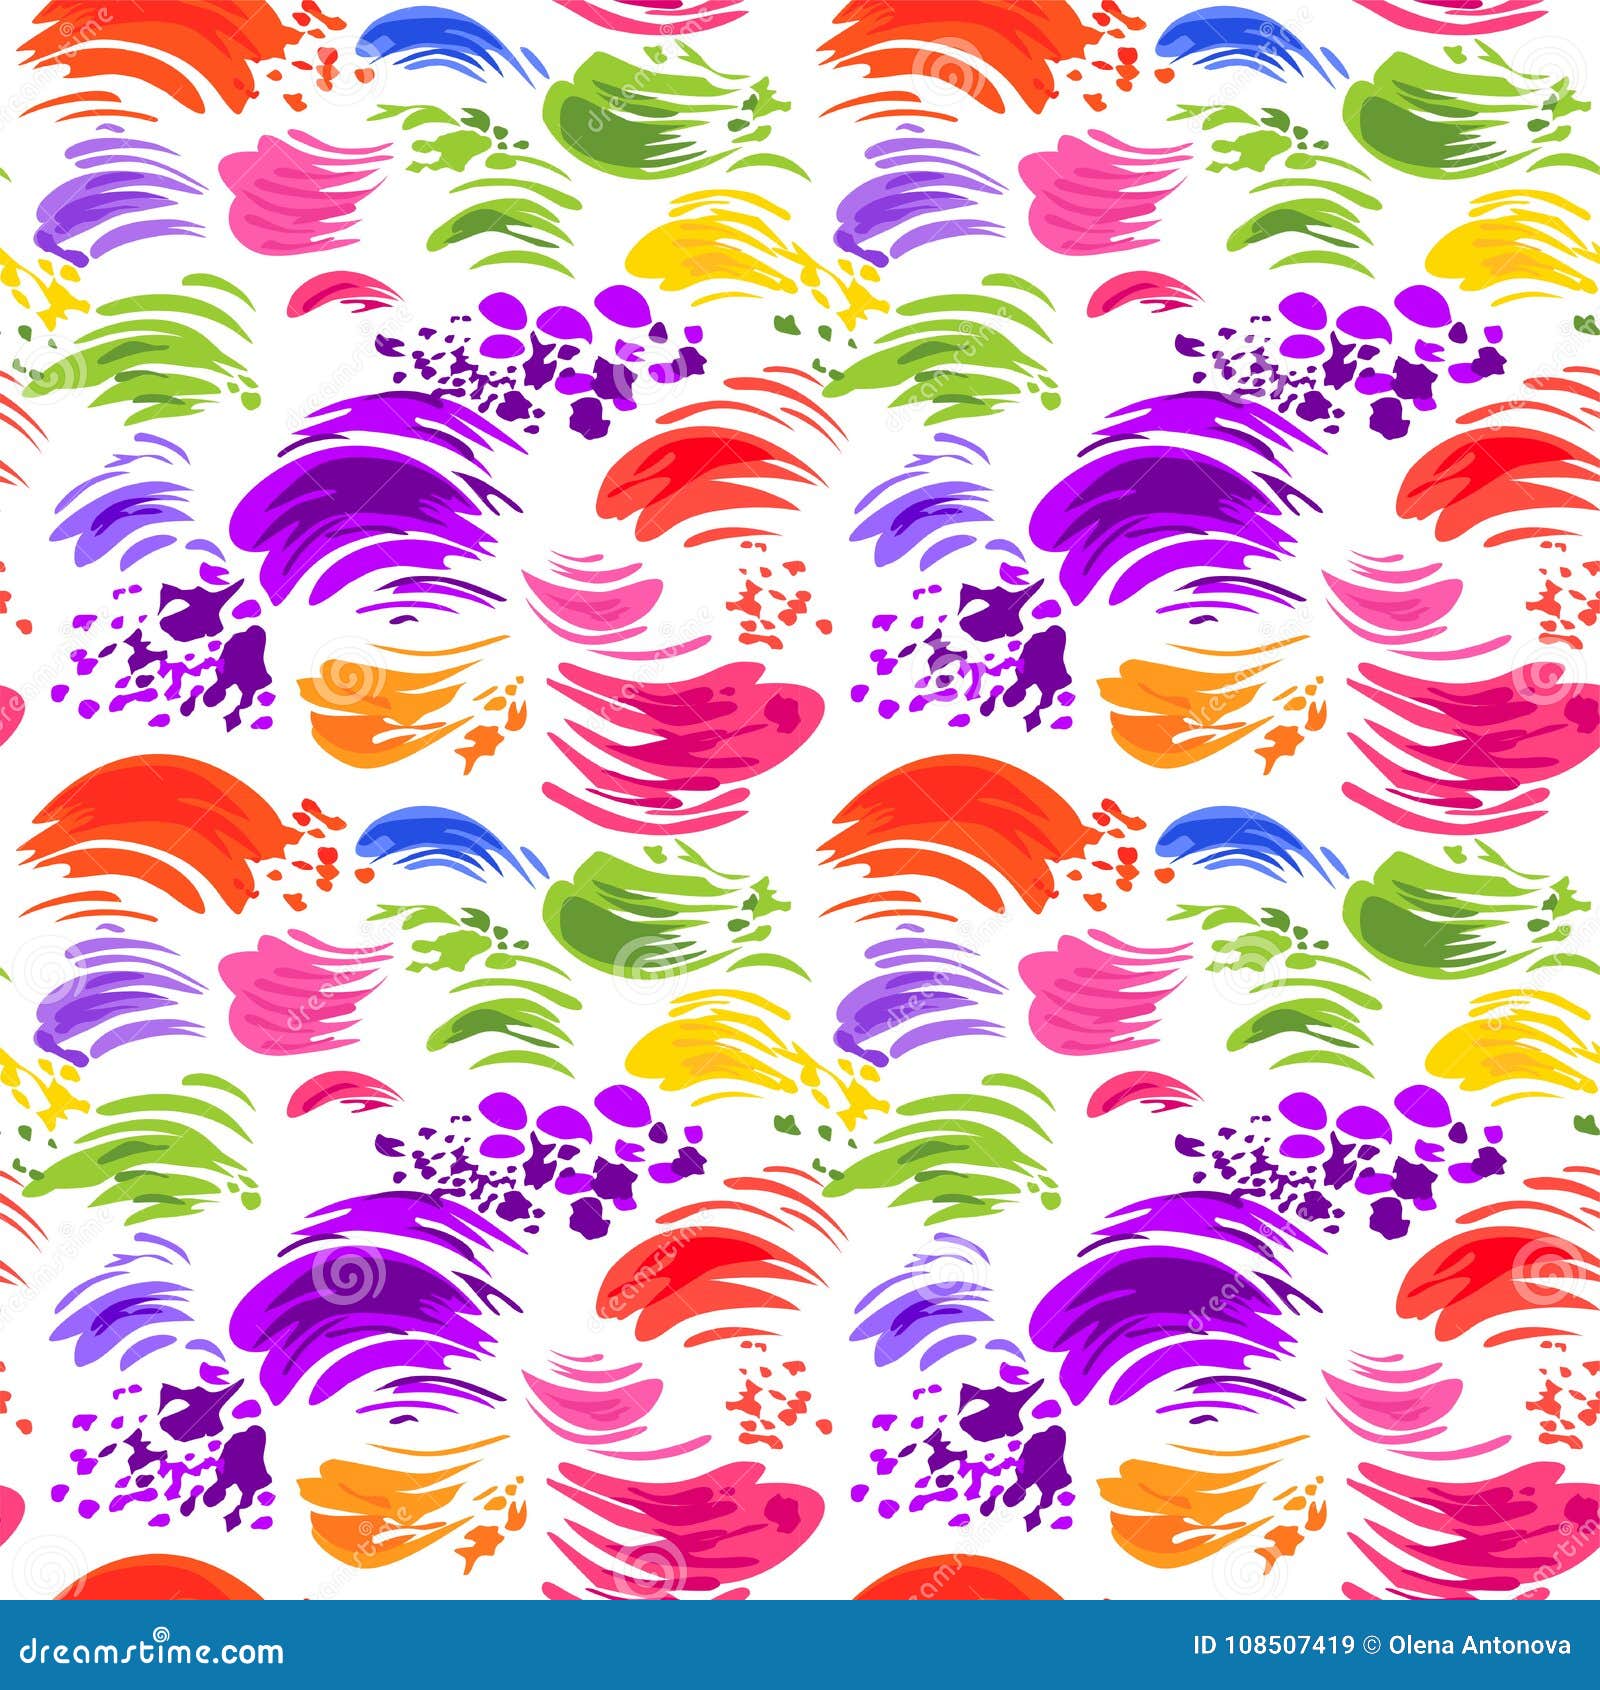 Abstract Wallpaper with Colorful Brush Strokes Stock Vector